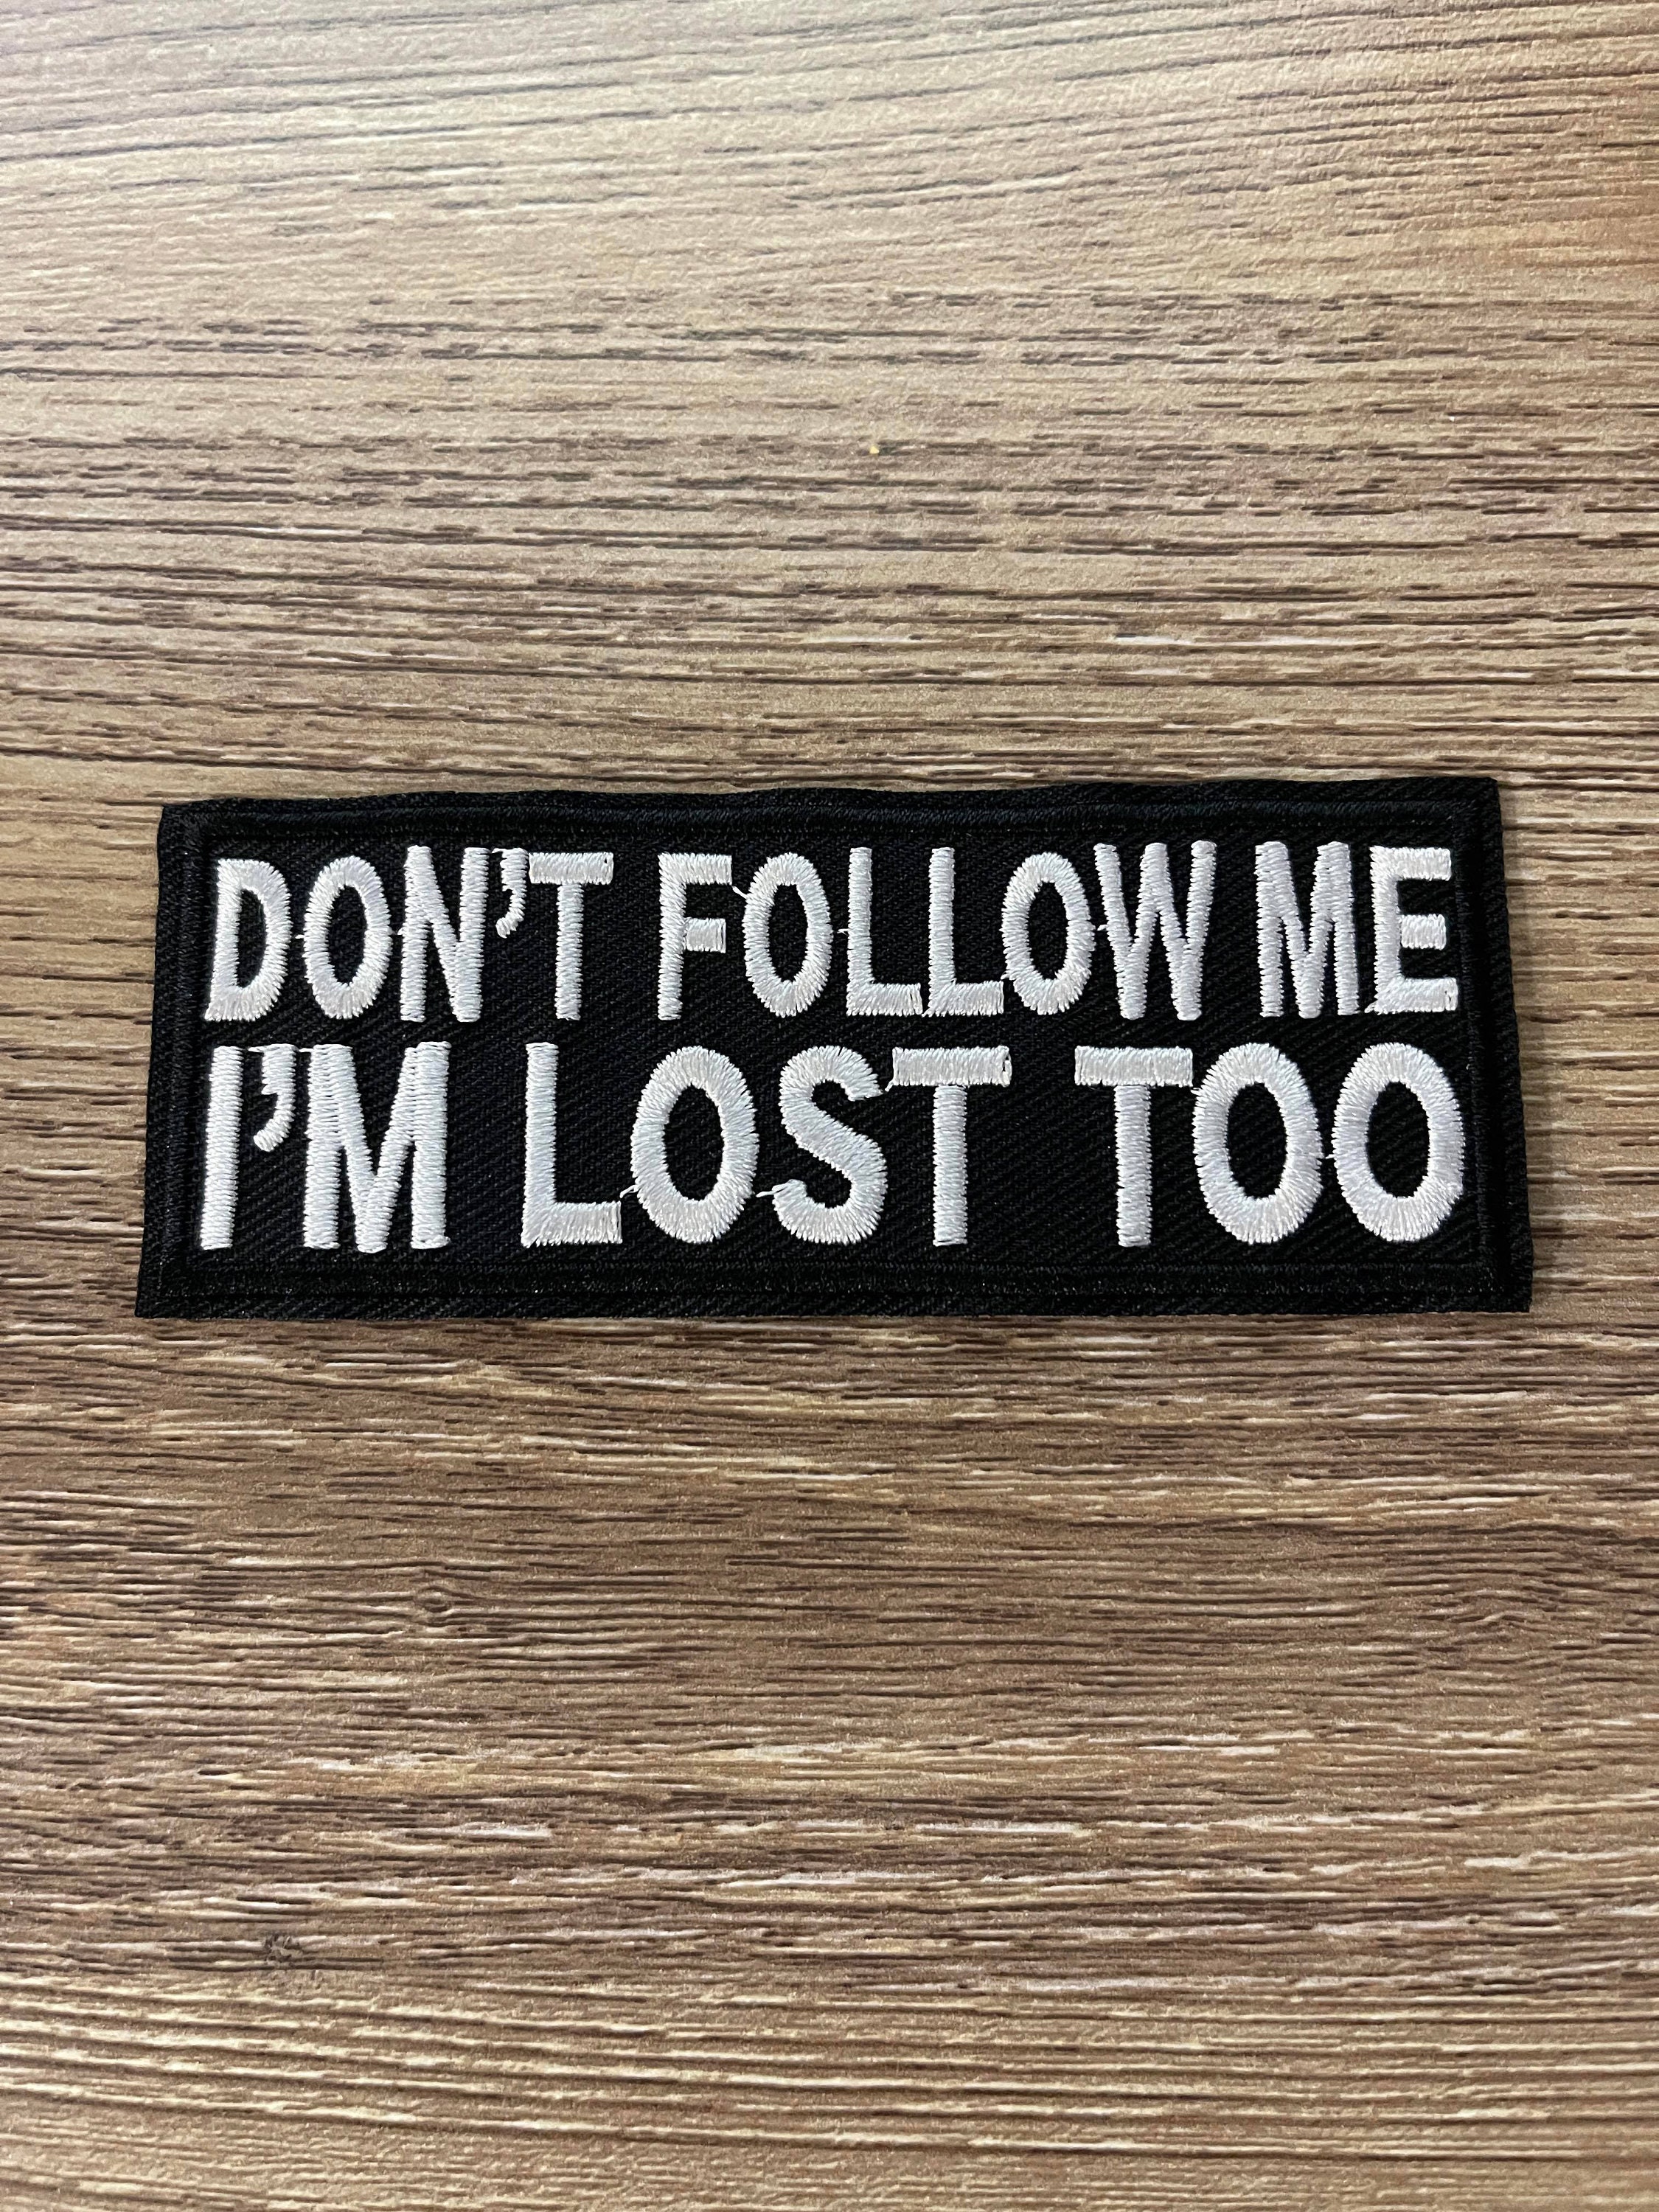 Don't follow me, I'm lost too – funny embroidered patch – Custom  Embroidered Patches – Highest Quality, Merrow Border Available